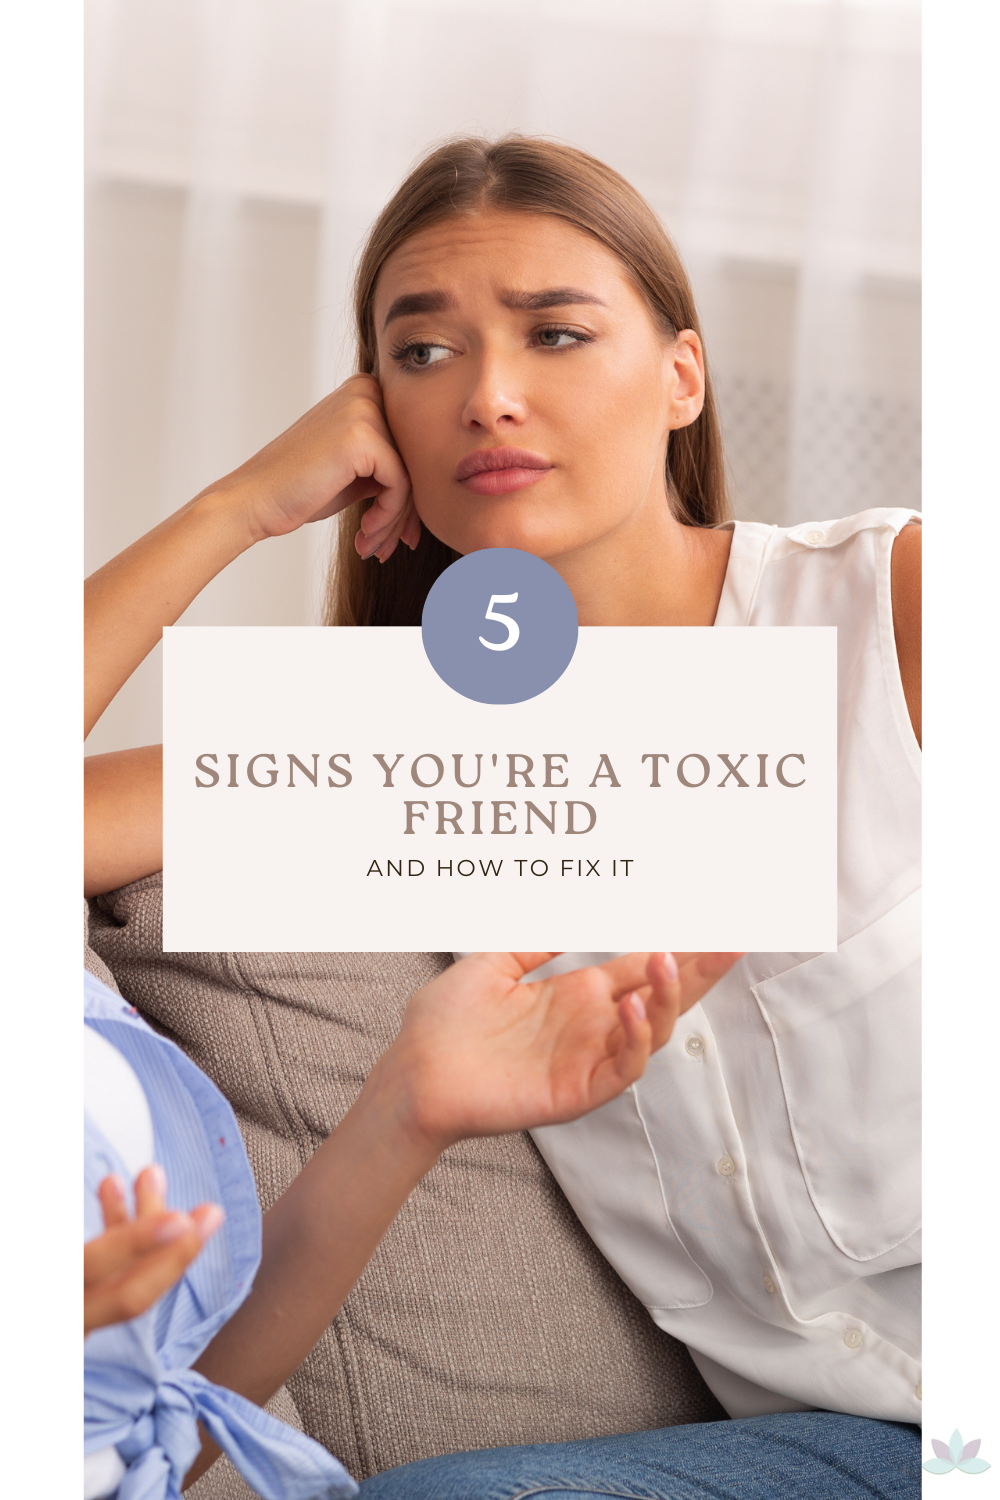 5 Signs You're a Toxic Friend and How to Fix It